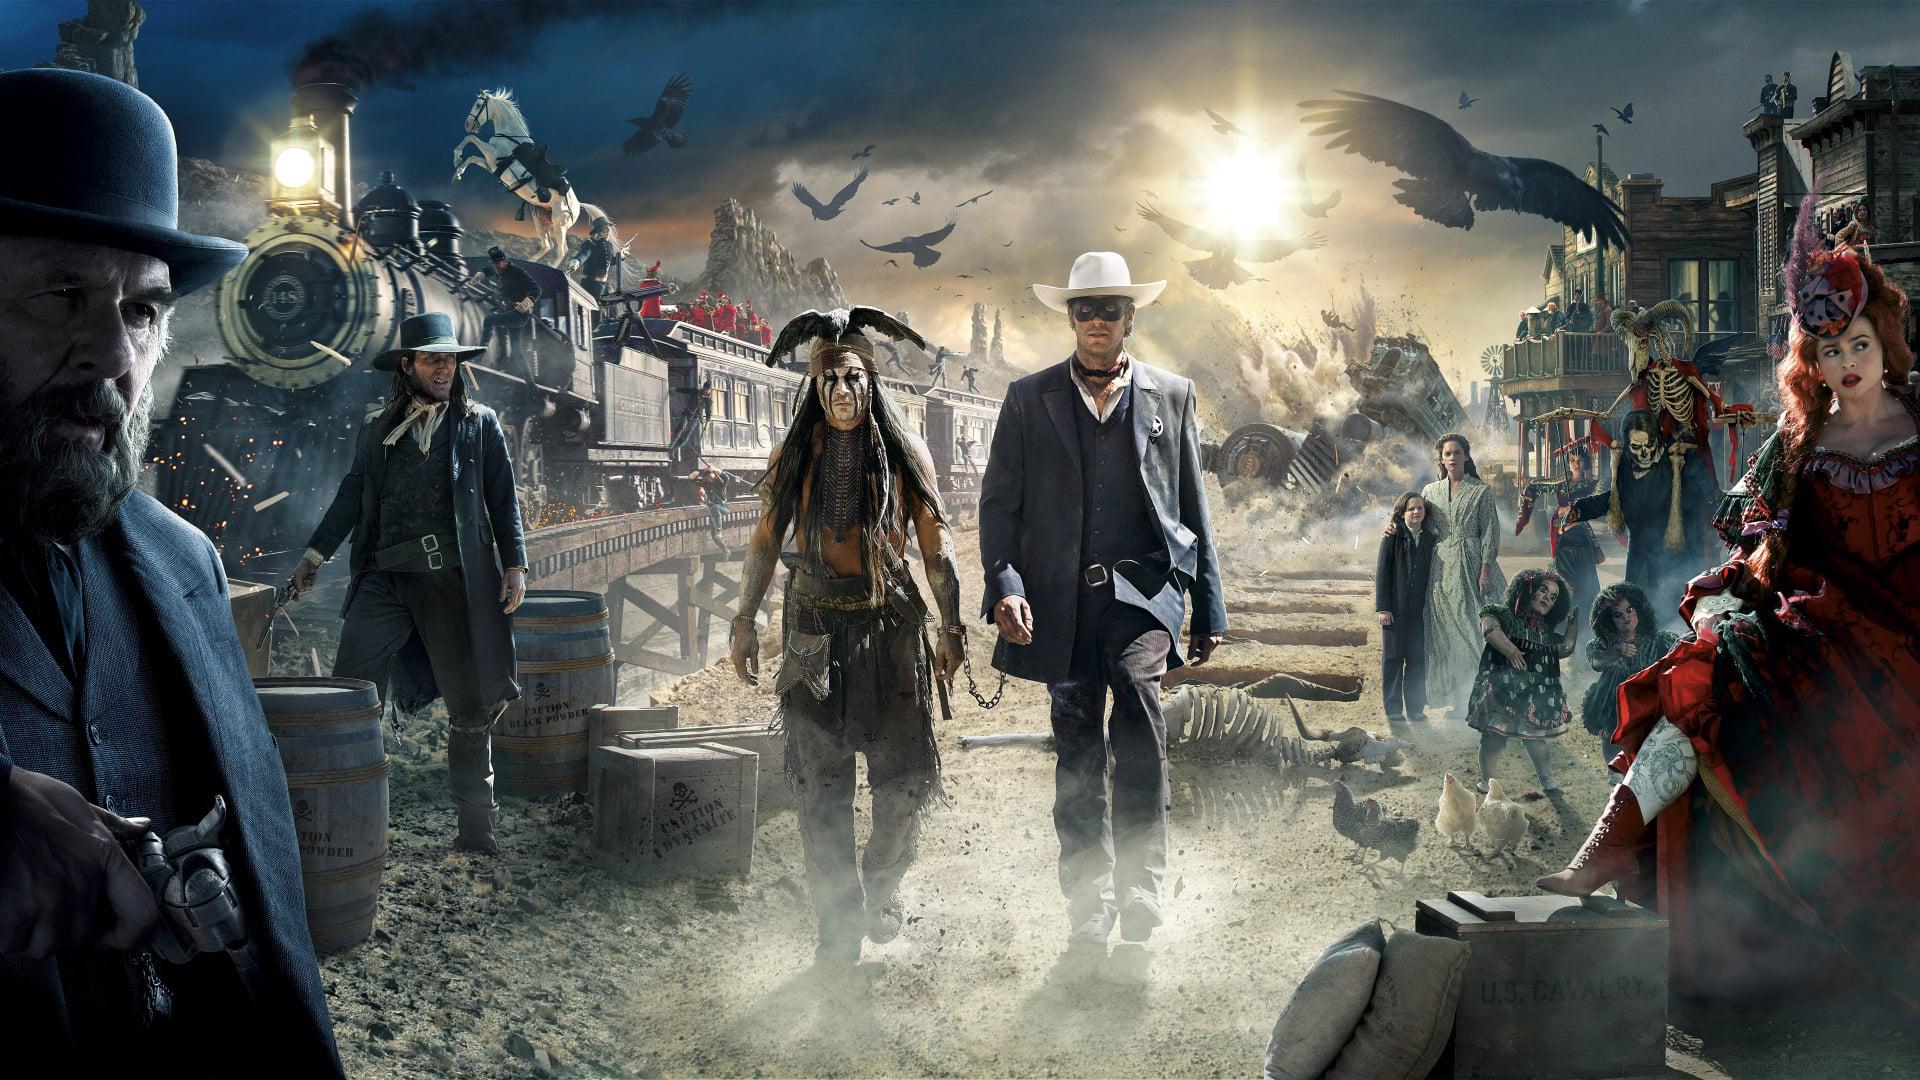 Backdrop Image for The Lone Ranger